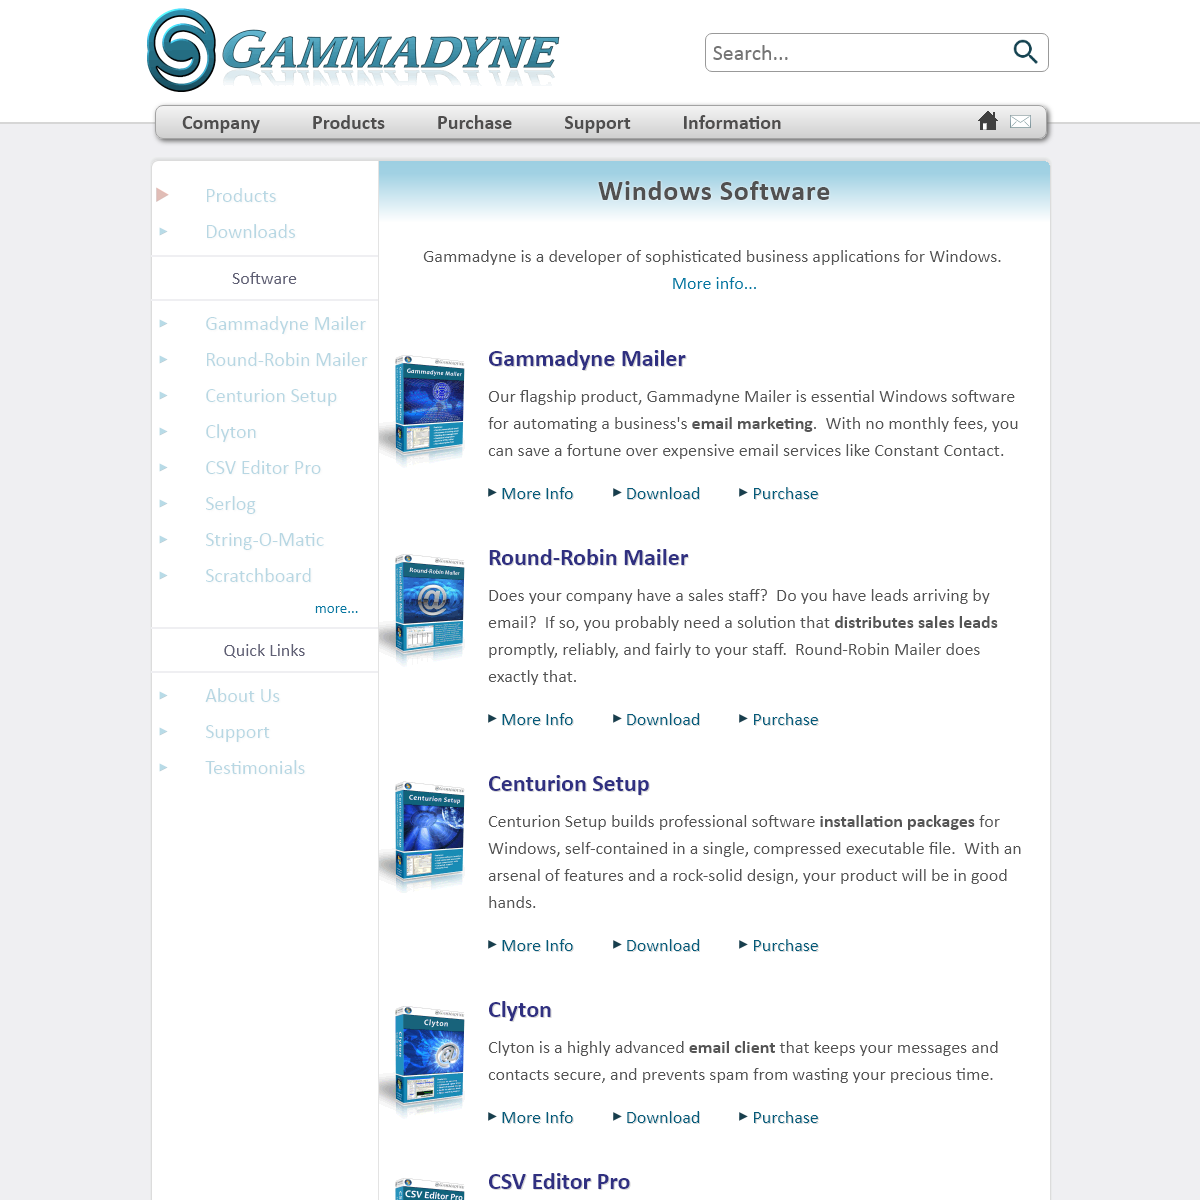 A complete backup of gammadyne.com